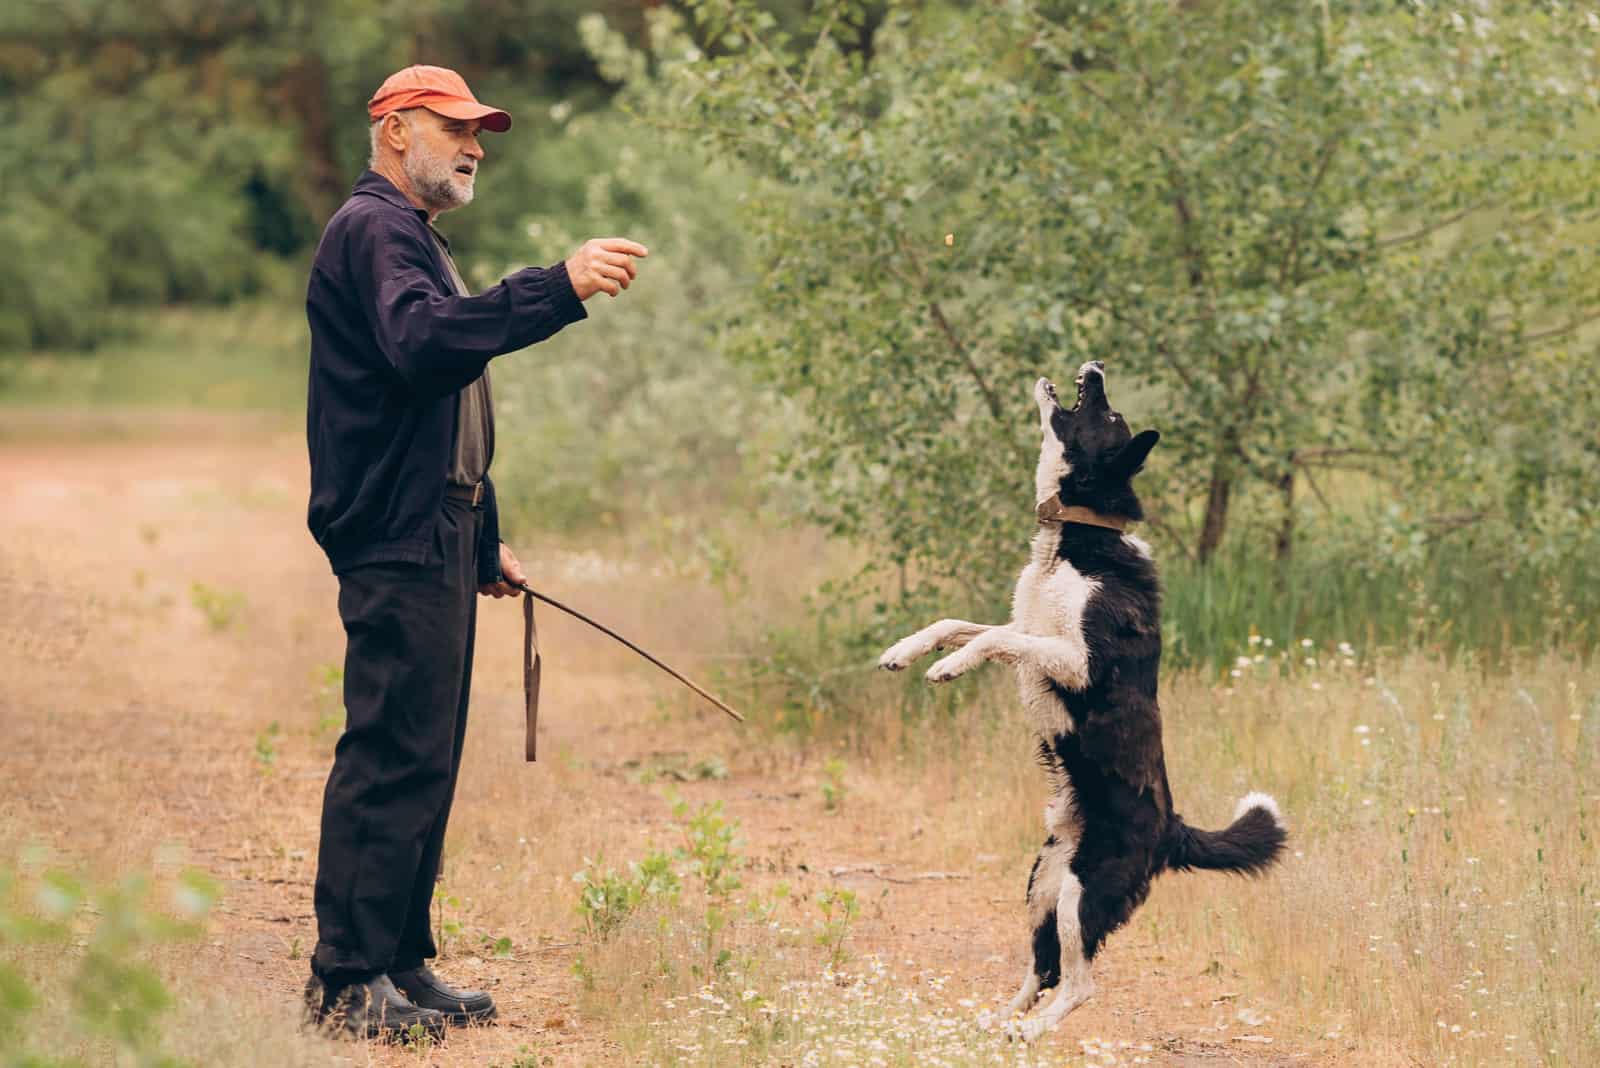 A man trains his yard dog in nature near the forest